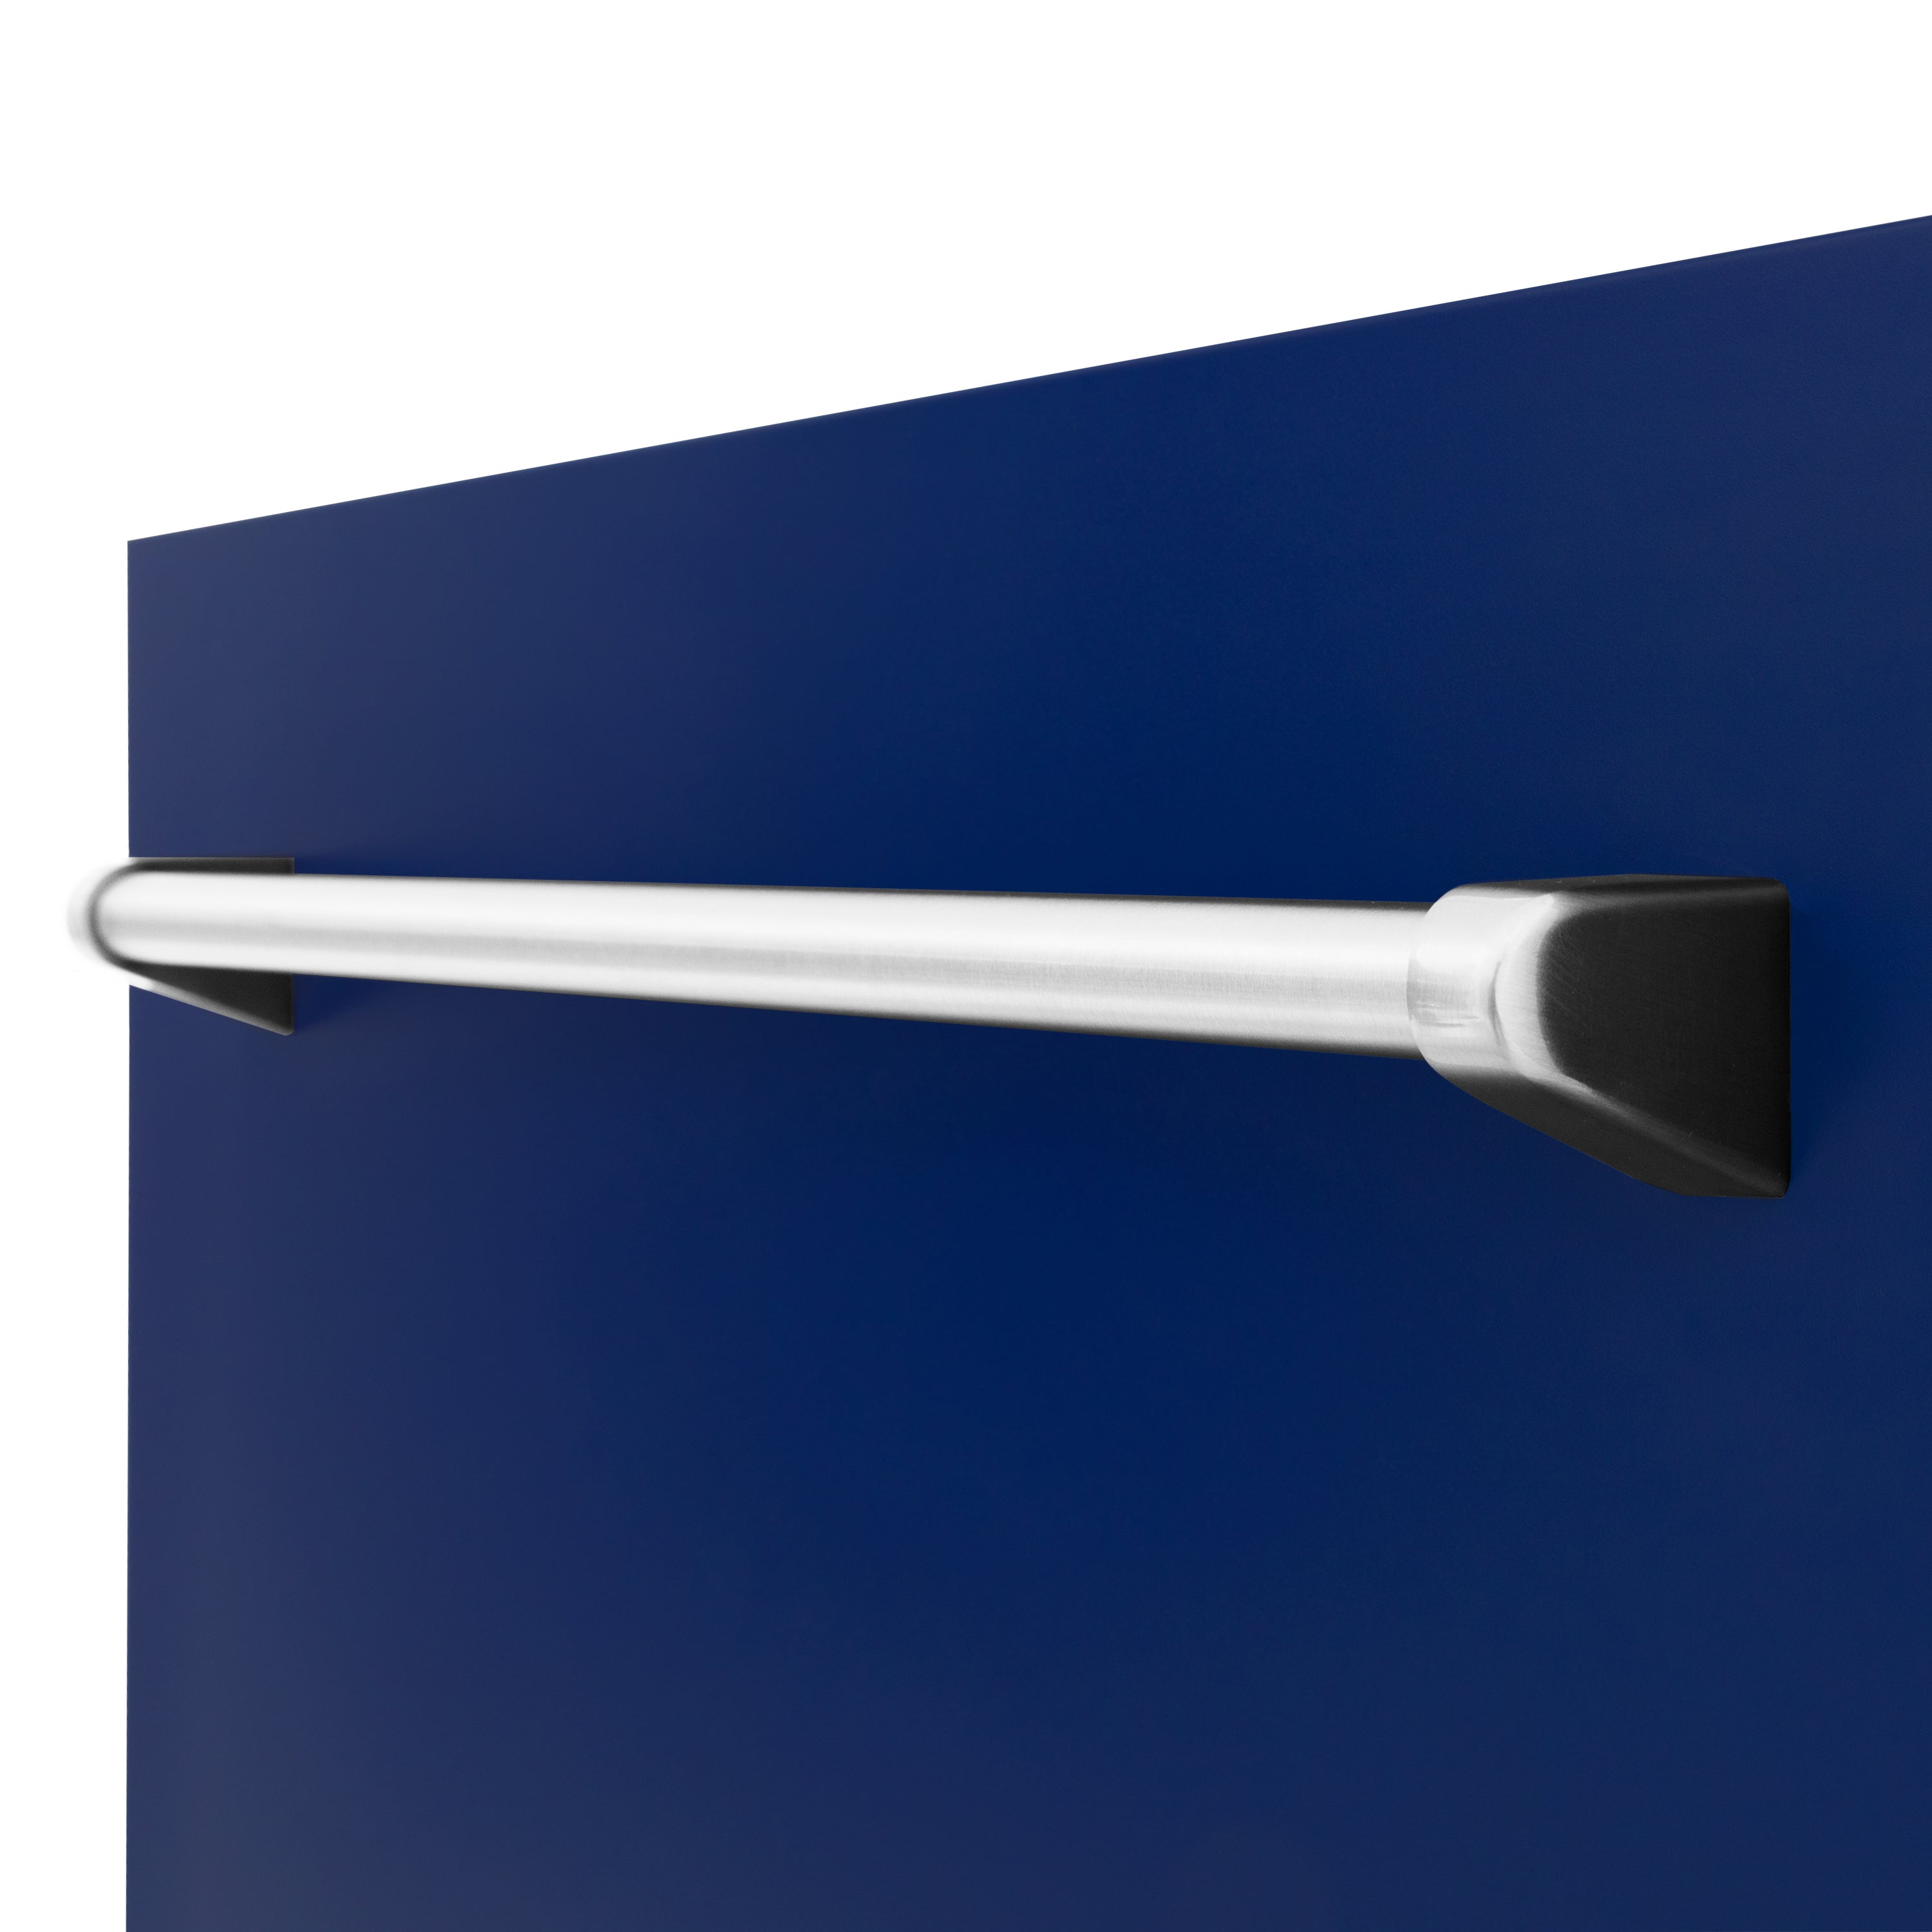 ZLINE 18" Tallac Dishwasher Panel in Blue Gloss with Traditional Handle (DPV-BG-18)